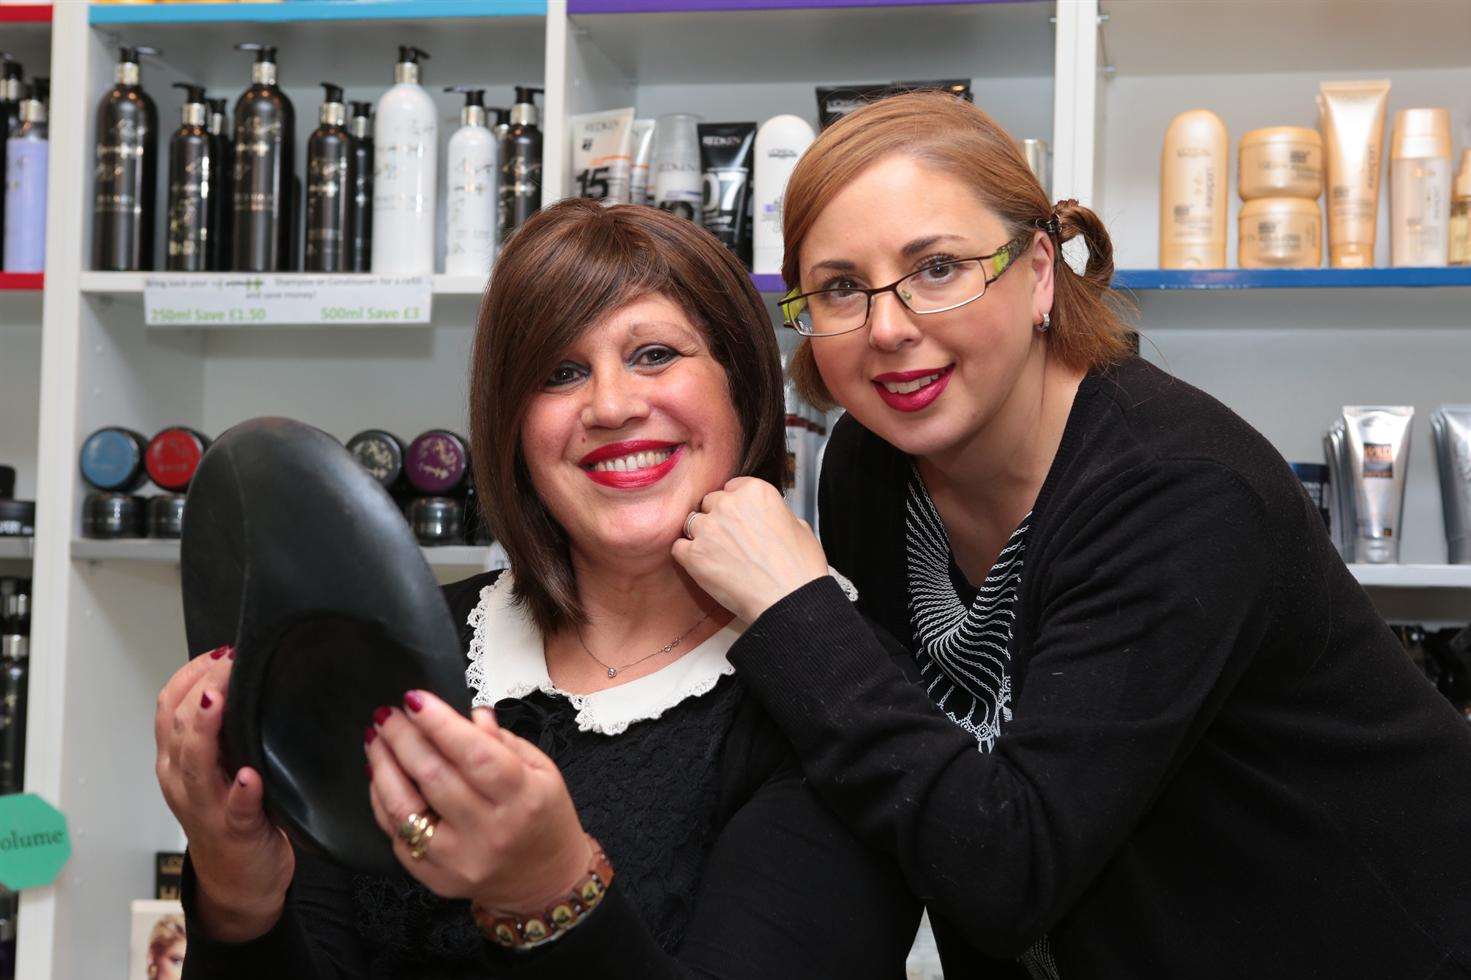 Anthea Mitchell underwent training to fit and source suitable wigs after her friend Marianna Moore was treated for breast cancer.